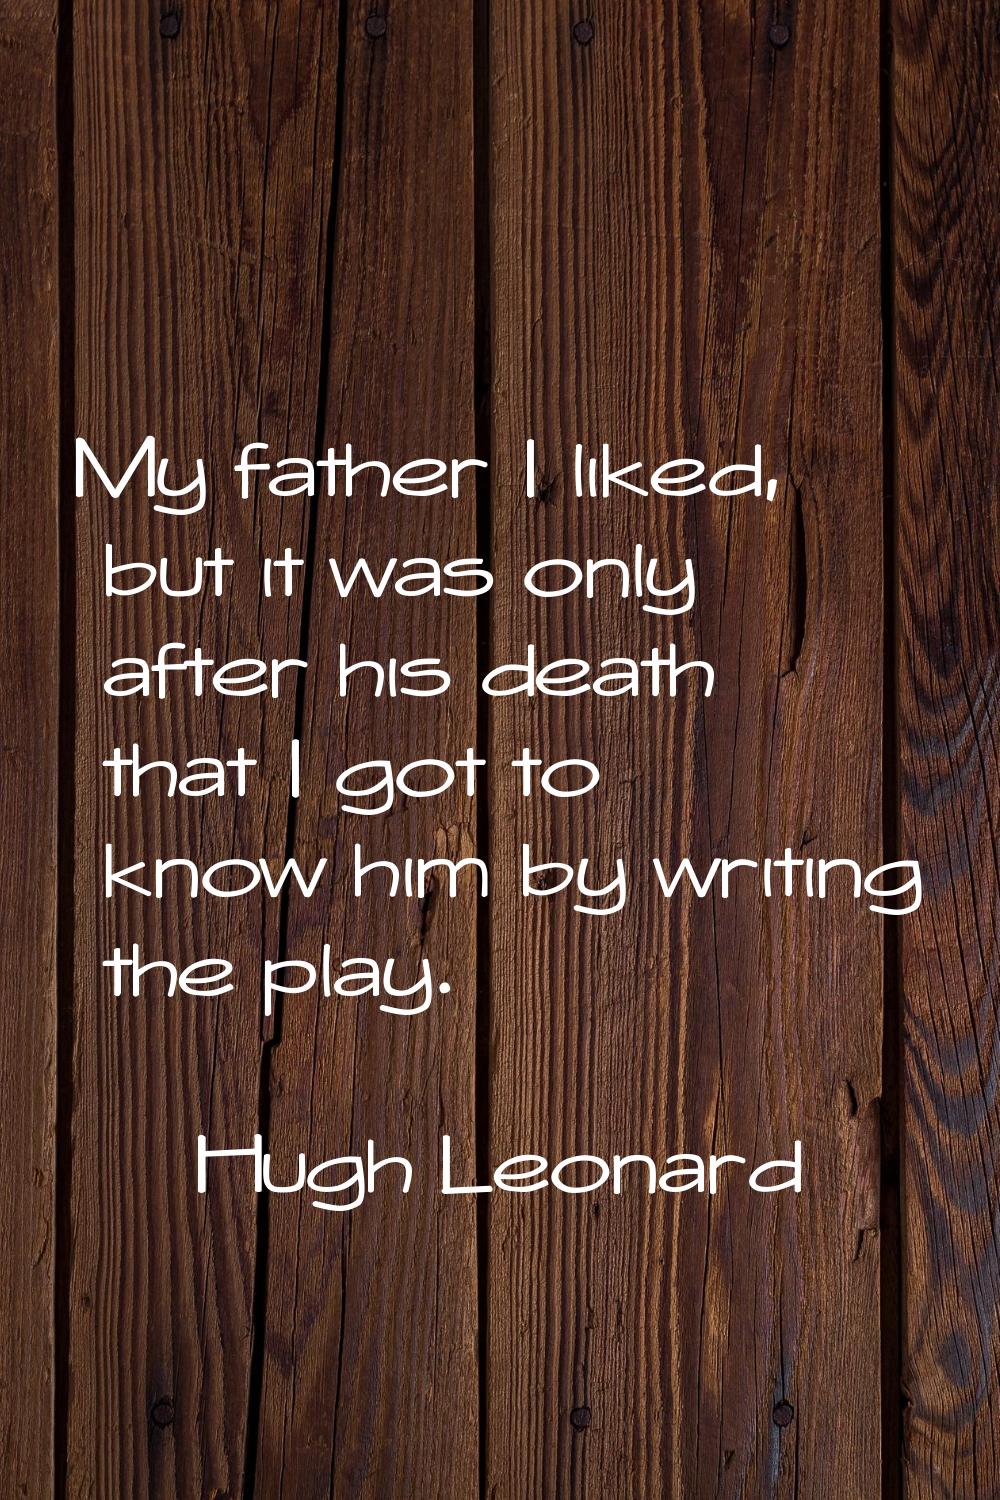 My father I liked, but it was only after his death that I got to know him by writing the play.